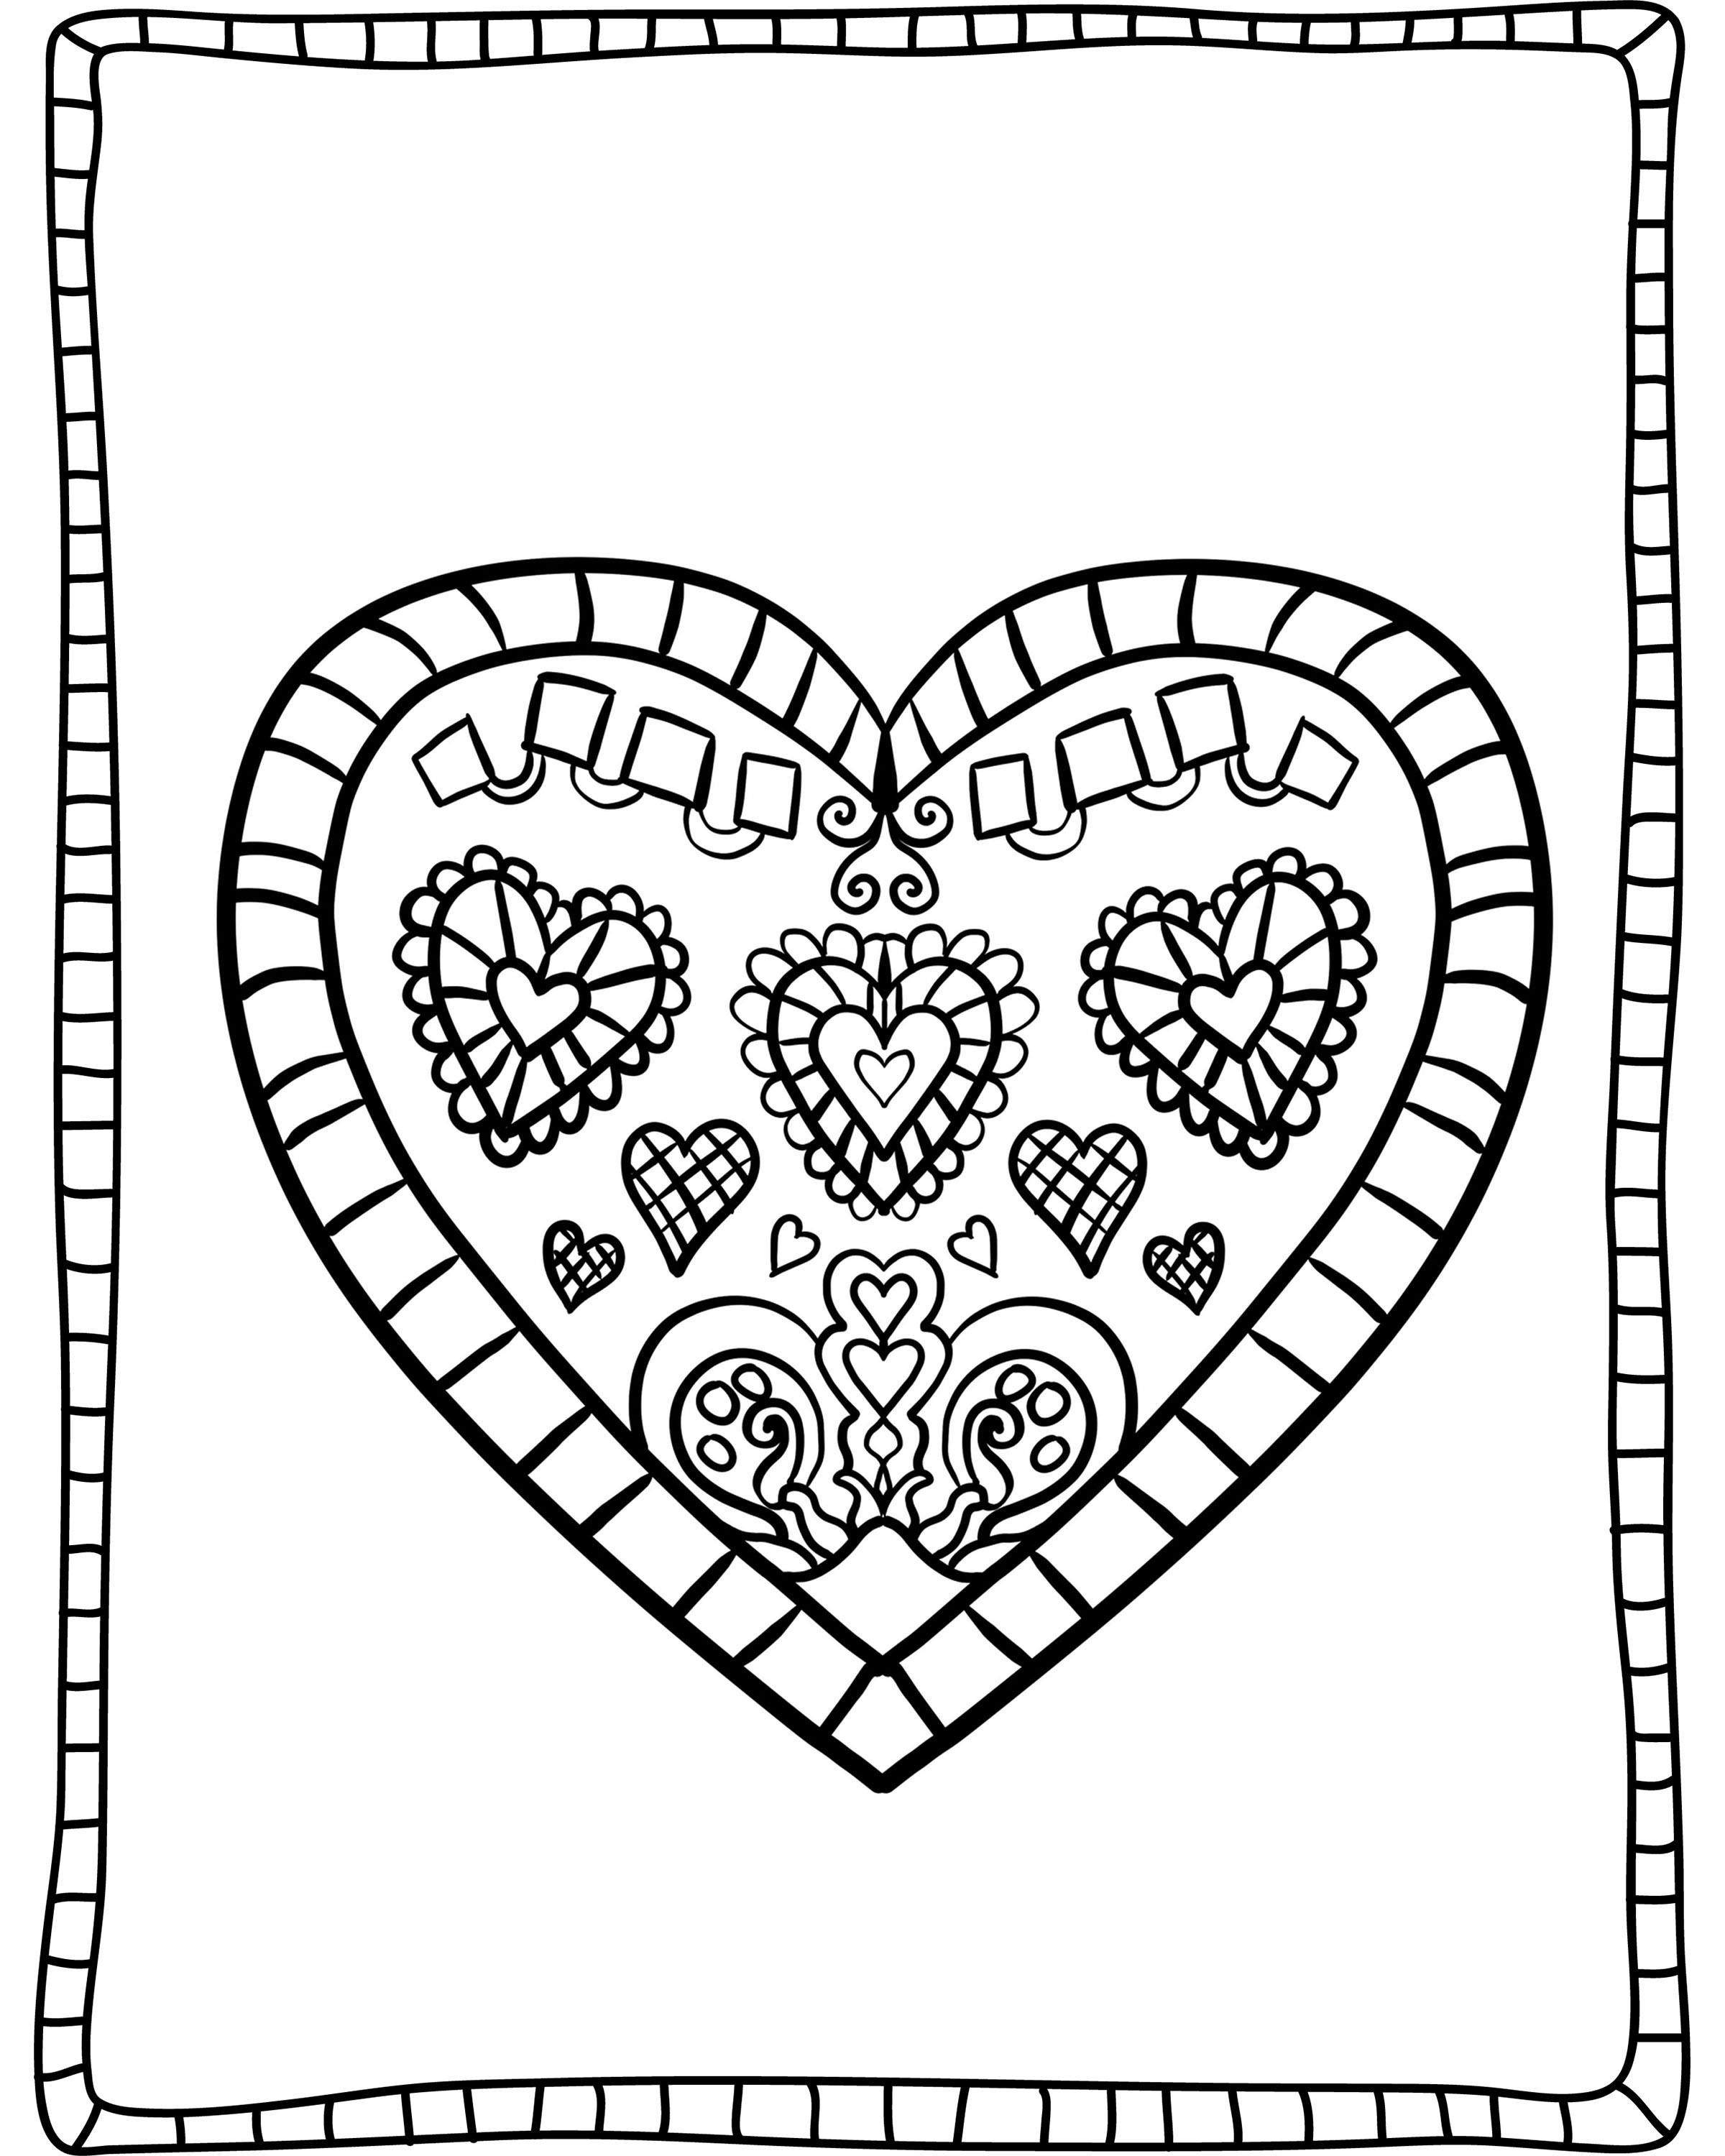 Free Valentine Coloring Pages For Adults
 Coloring Sheets Archives Stage Presents